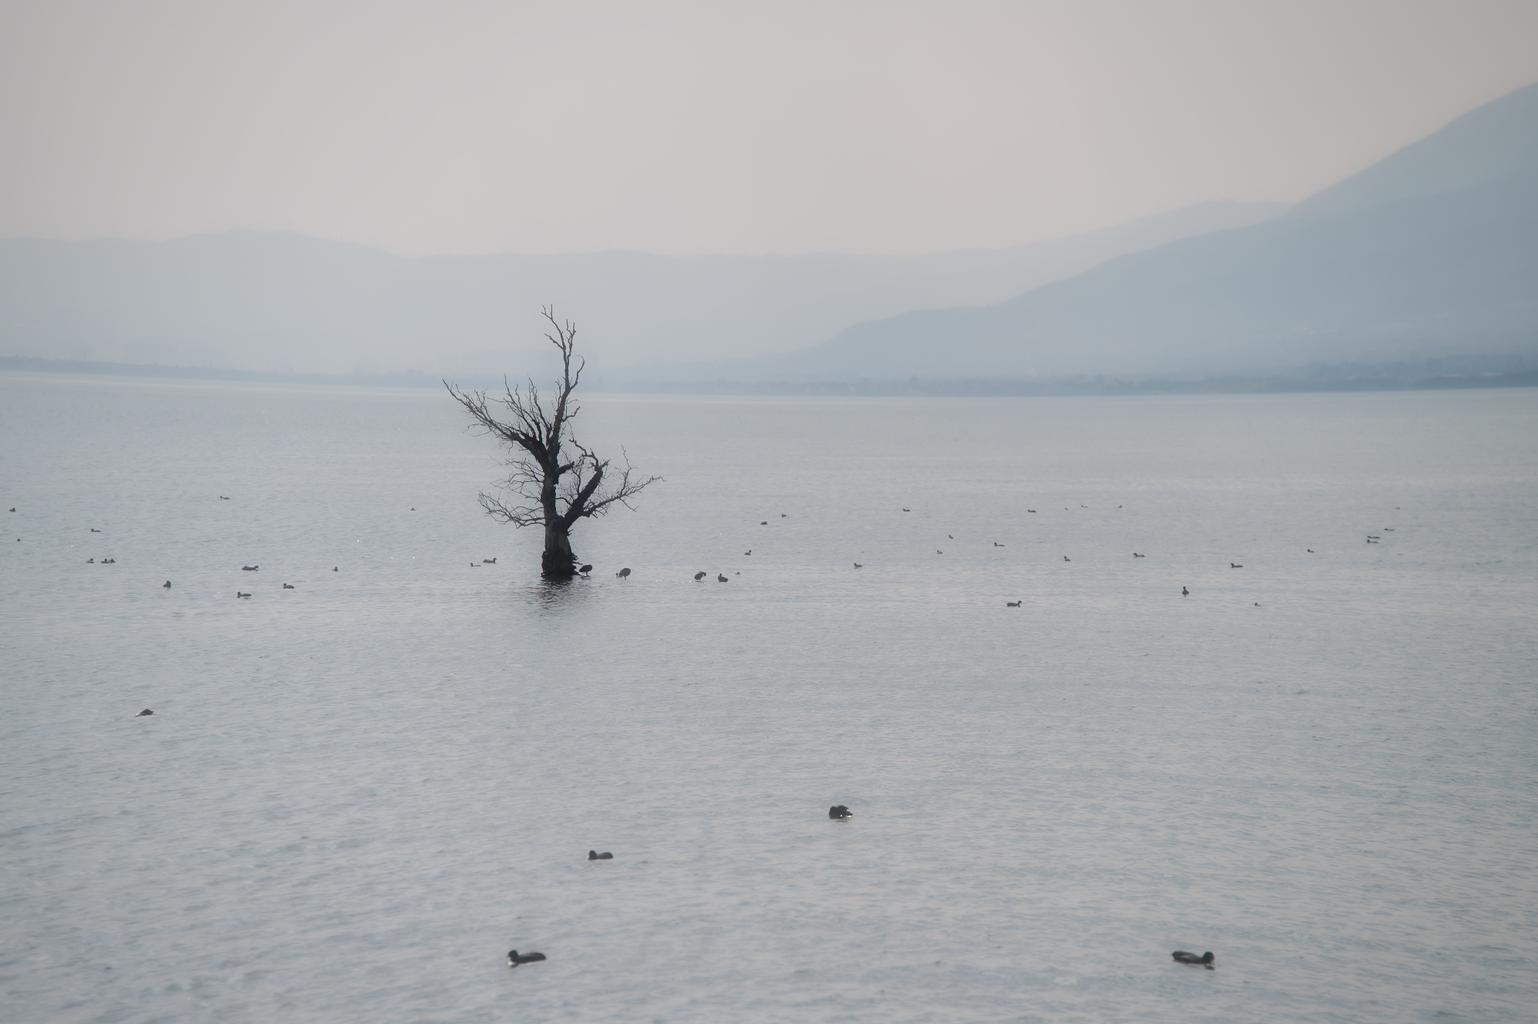 Picture: A solitary tree growing in the waters of Erhai.